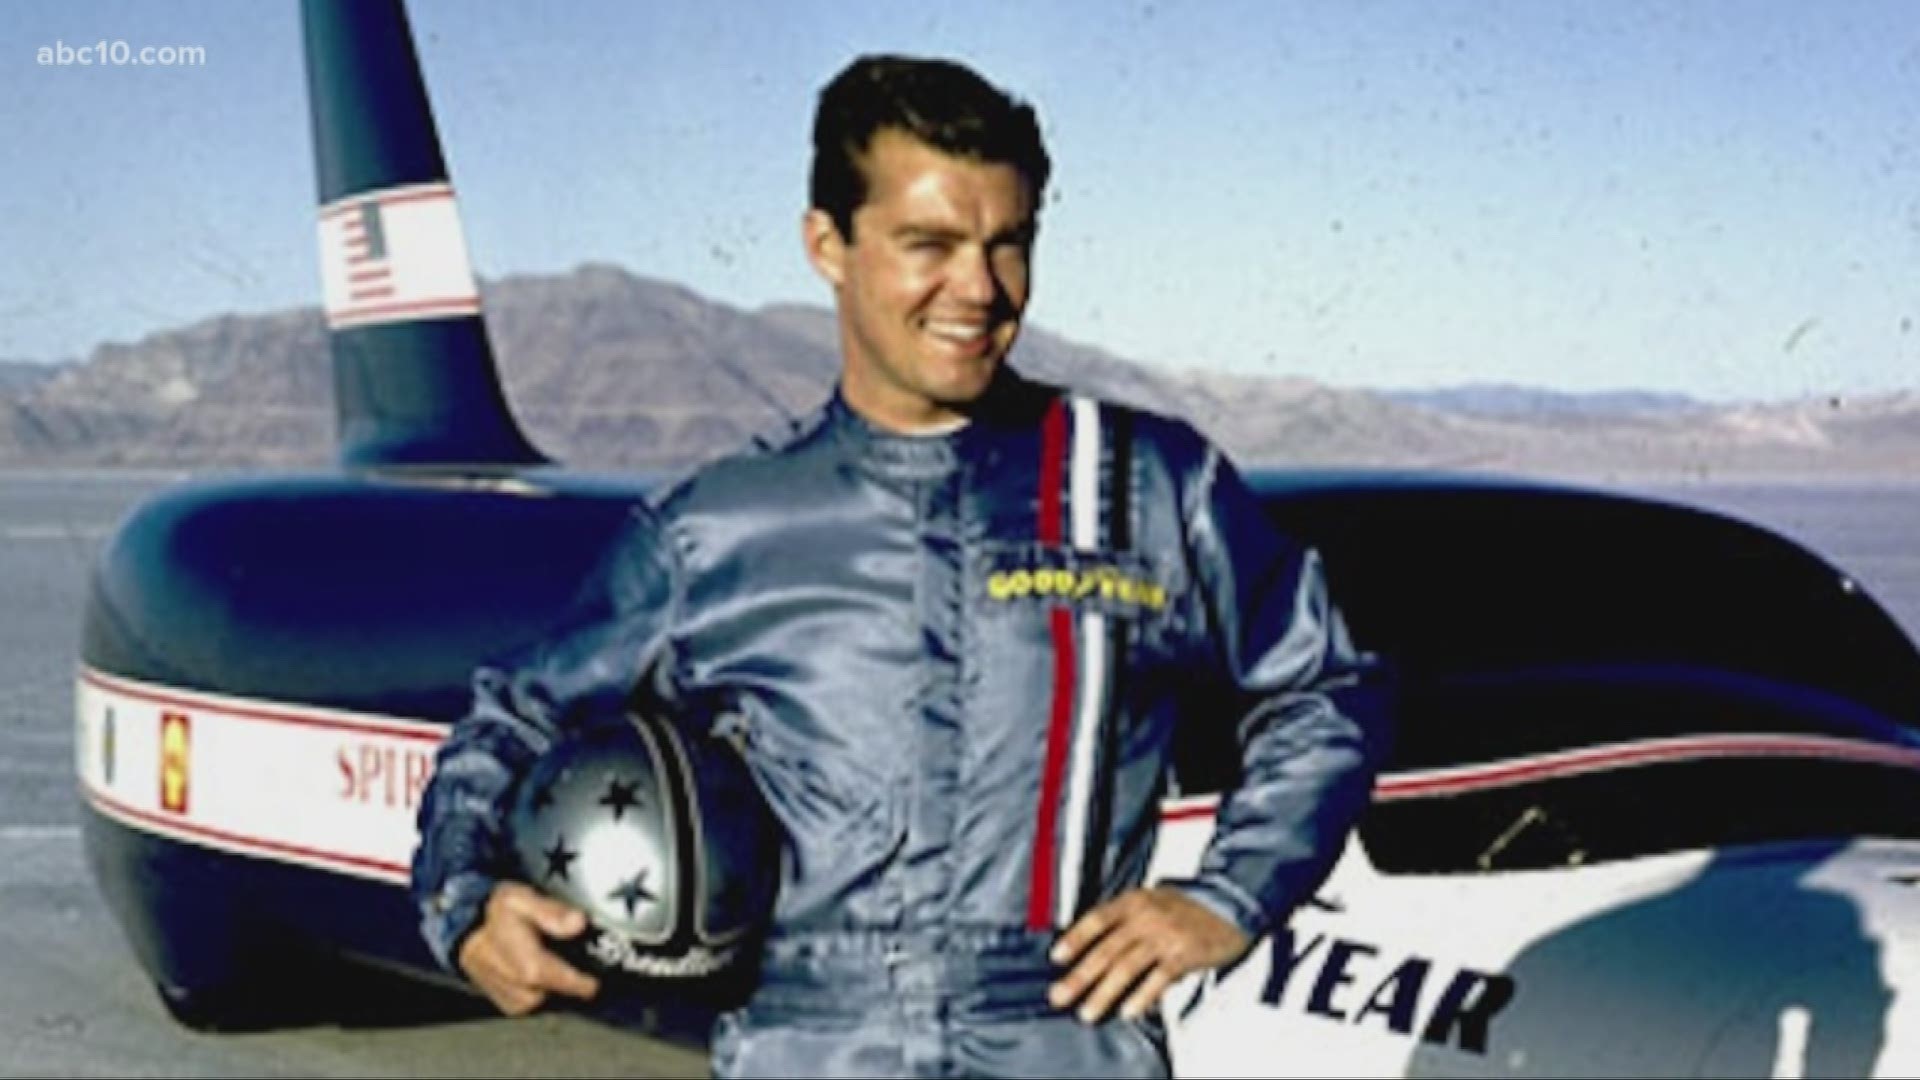 In the 1960's Craig Breedlove became not just the fastest, but also one of the most well known people in the world. He designed and piloted a land rocket known as the "Spirit of America", the first man to go 600 miles per hour on dry land. He now resides in Rio Vista.